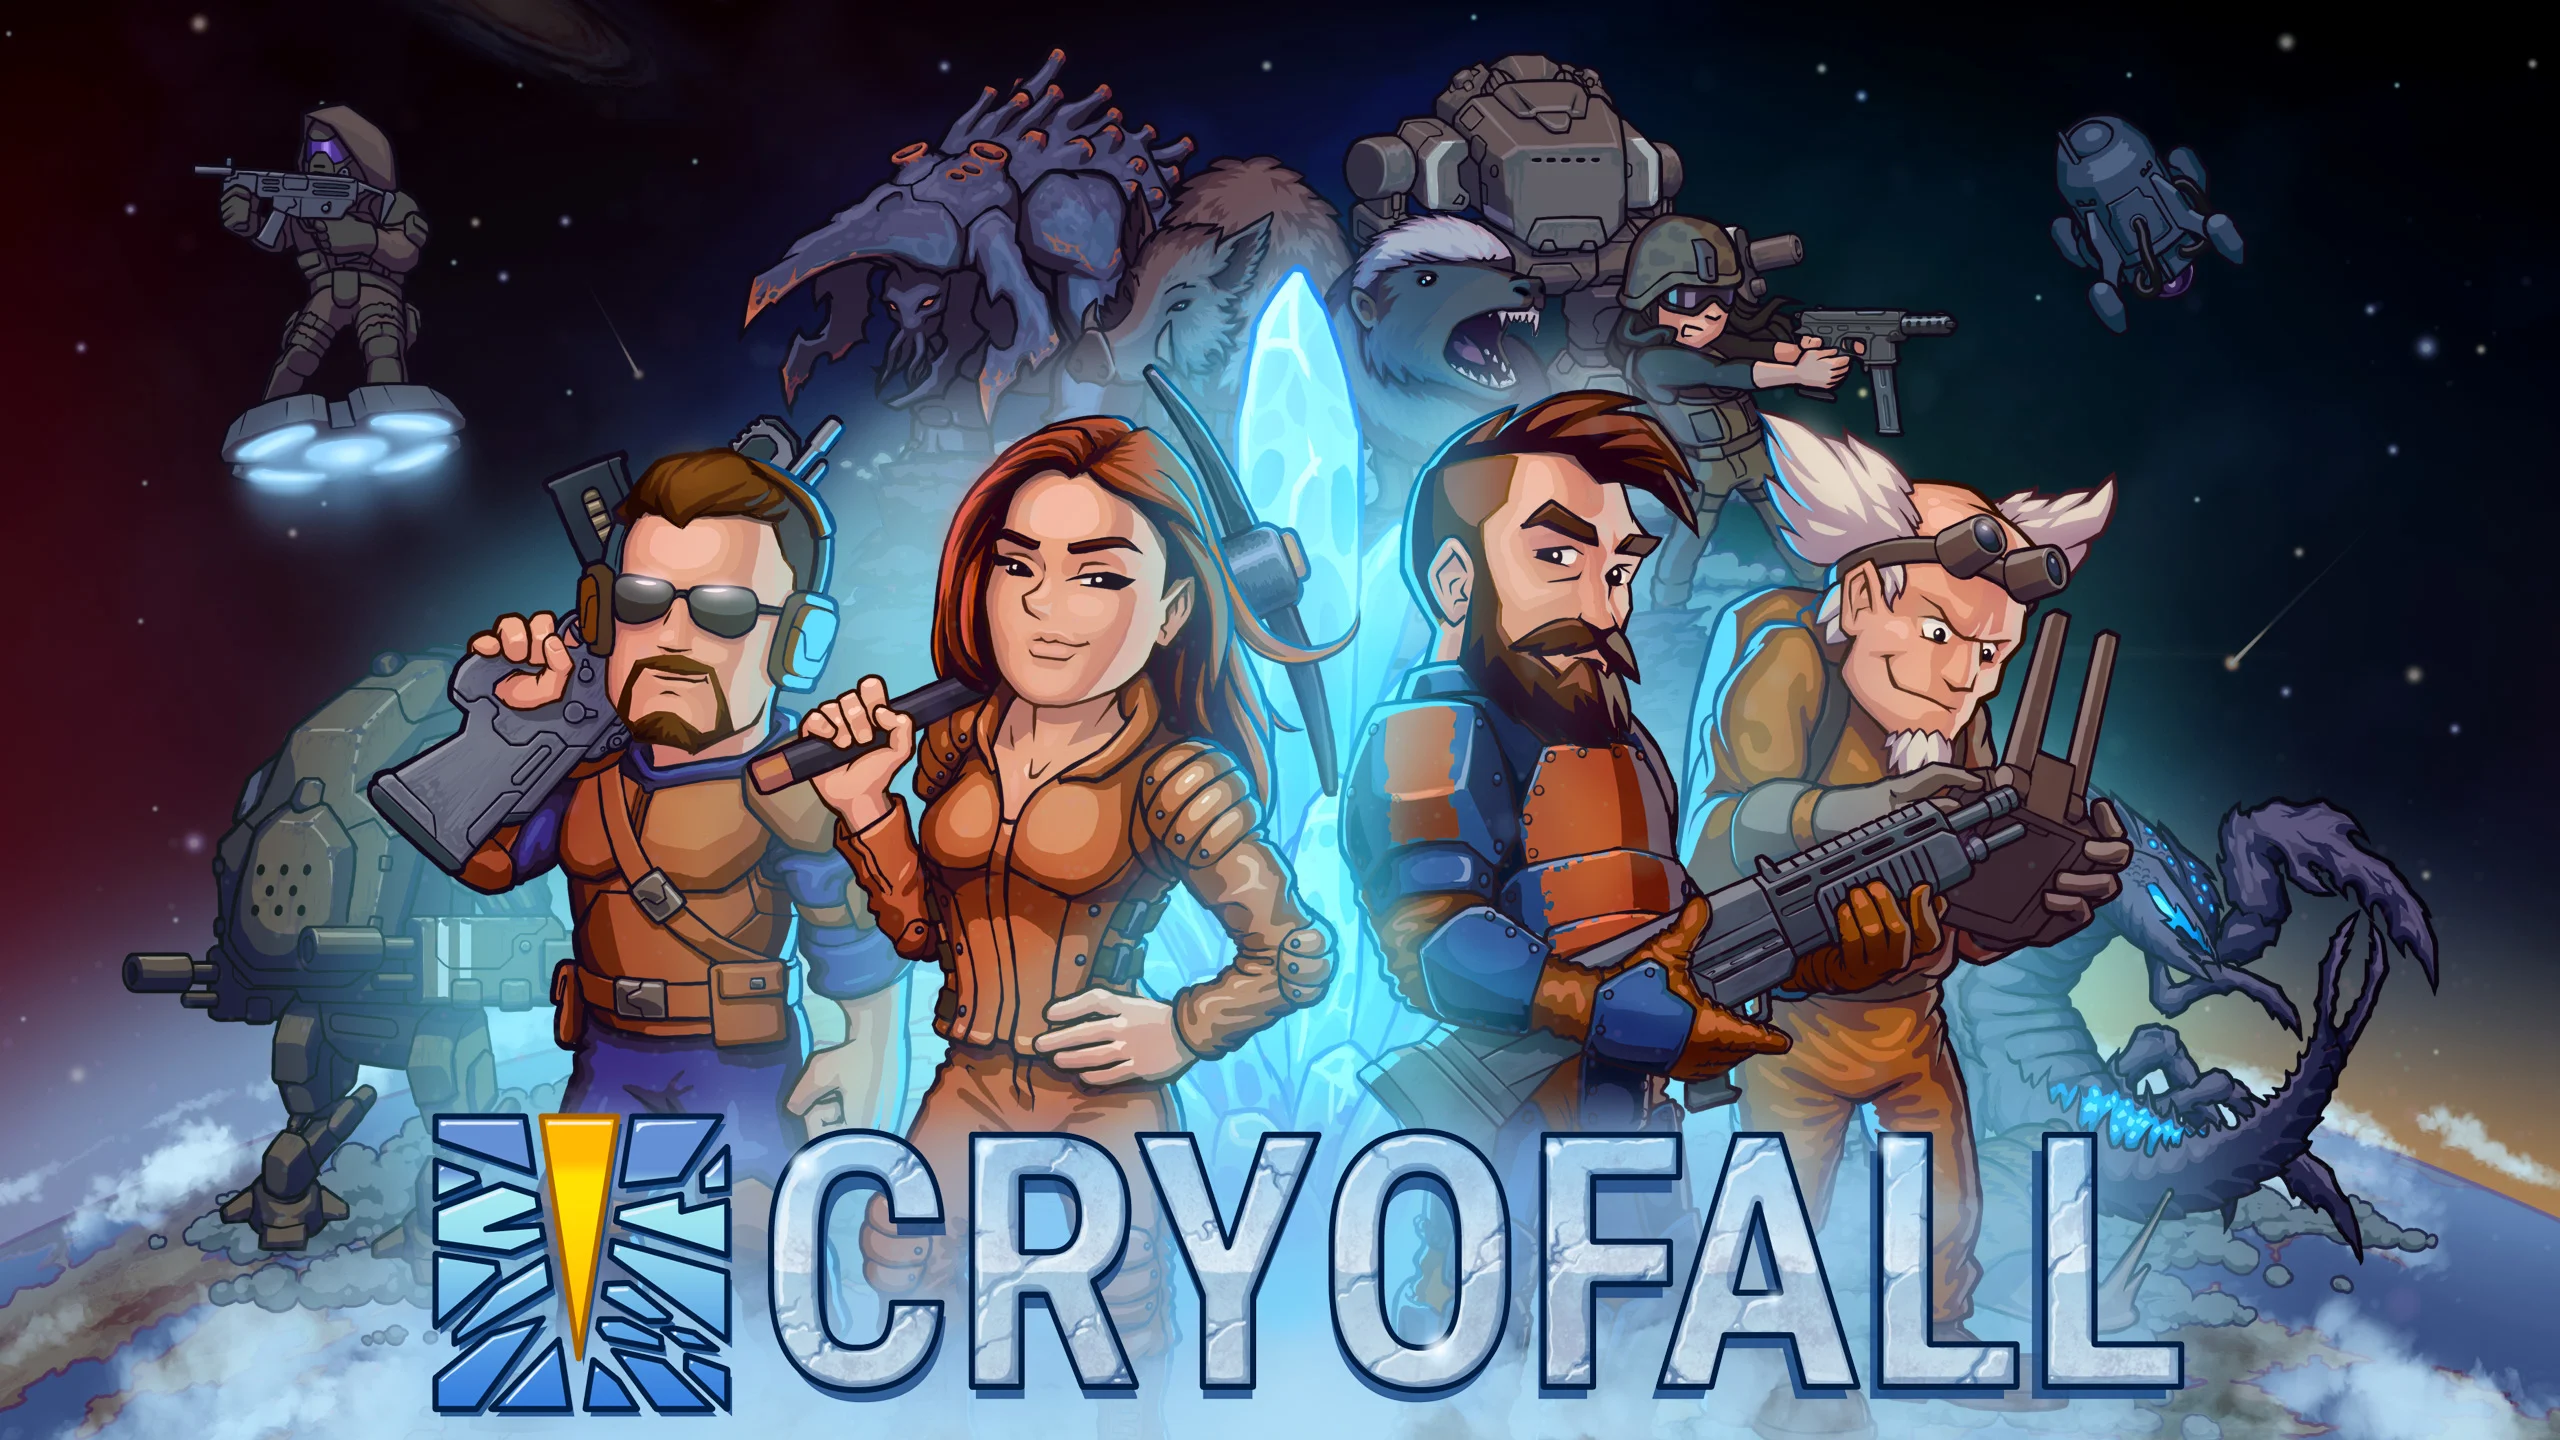 CryoFall Review